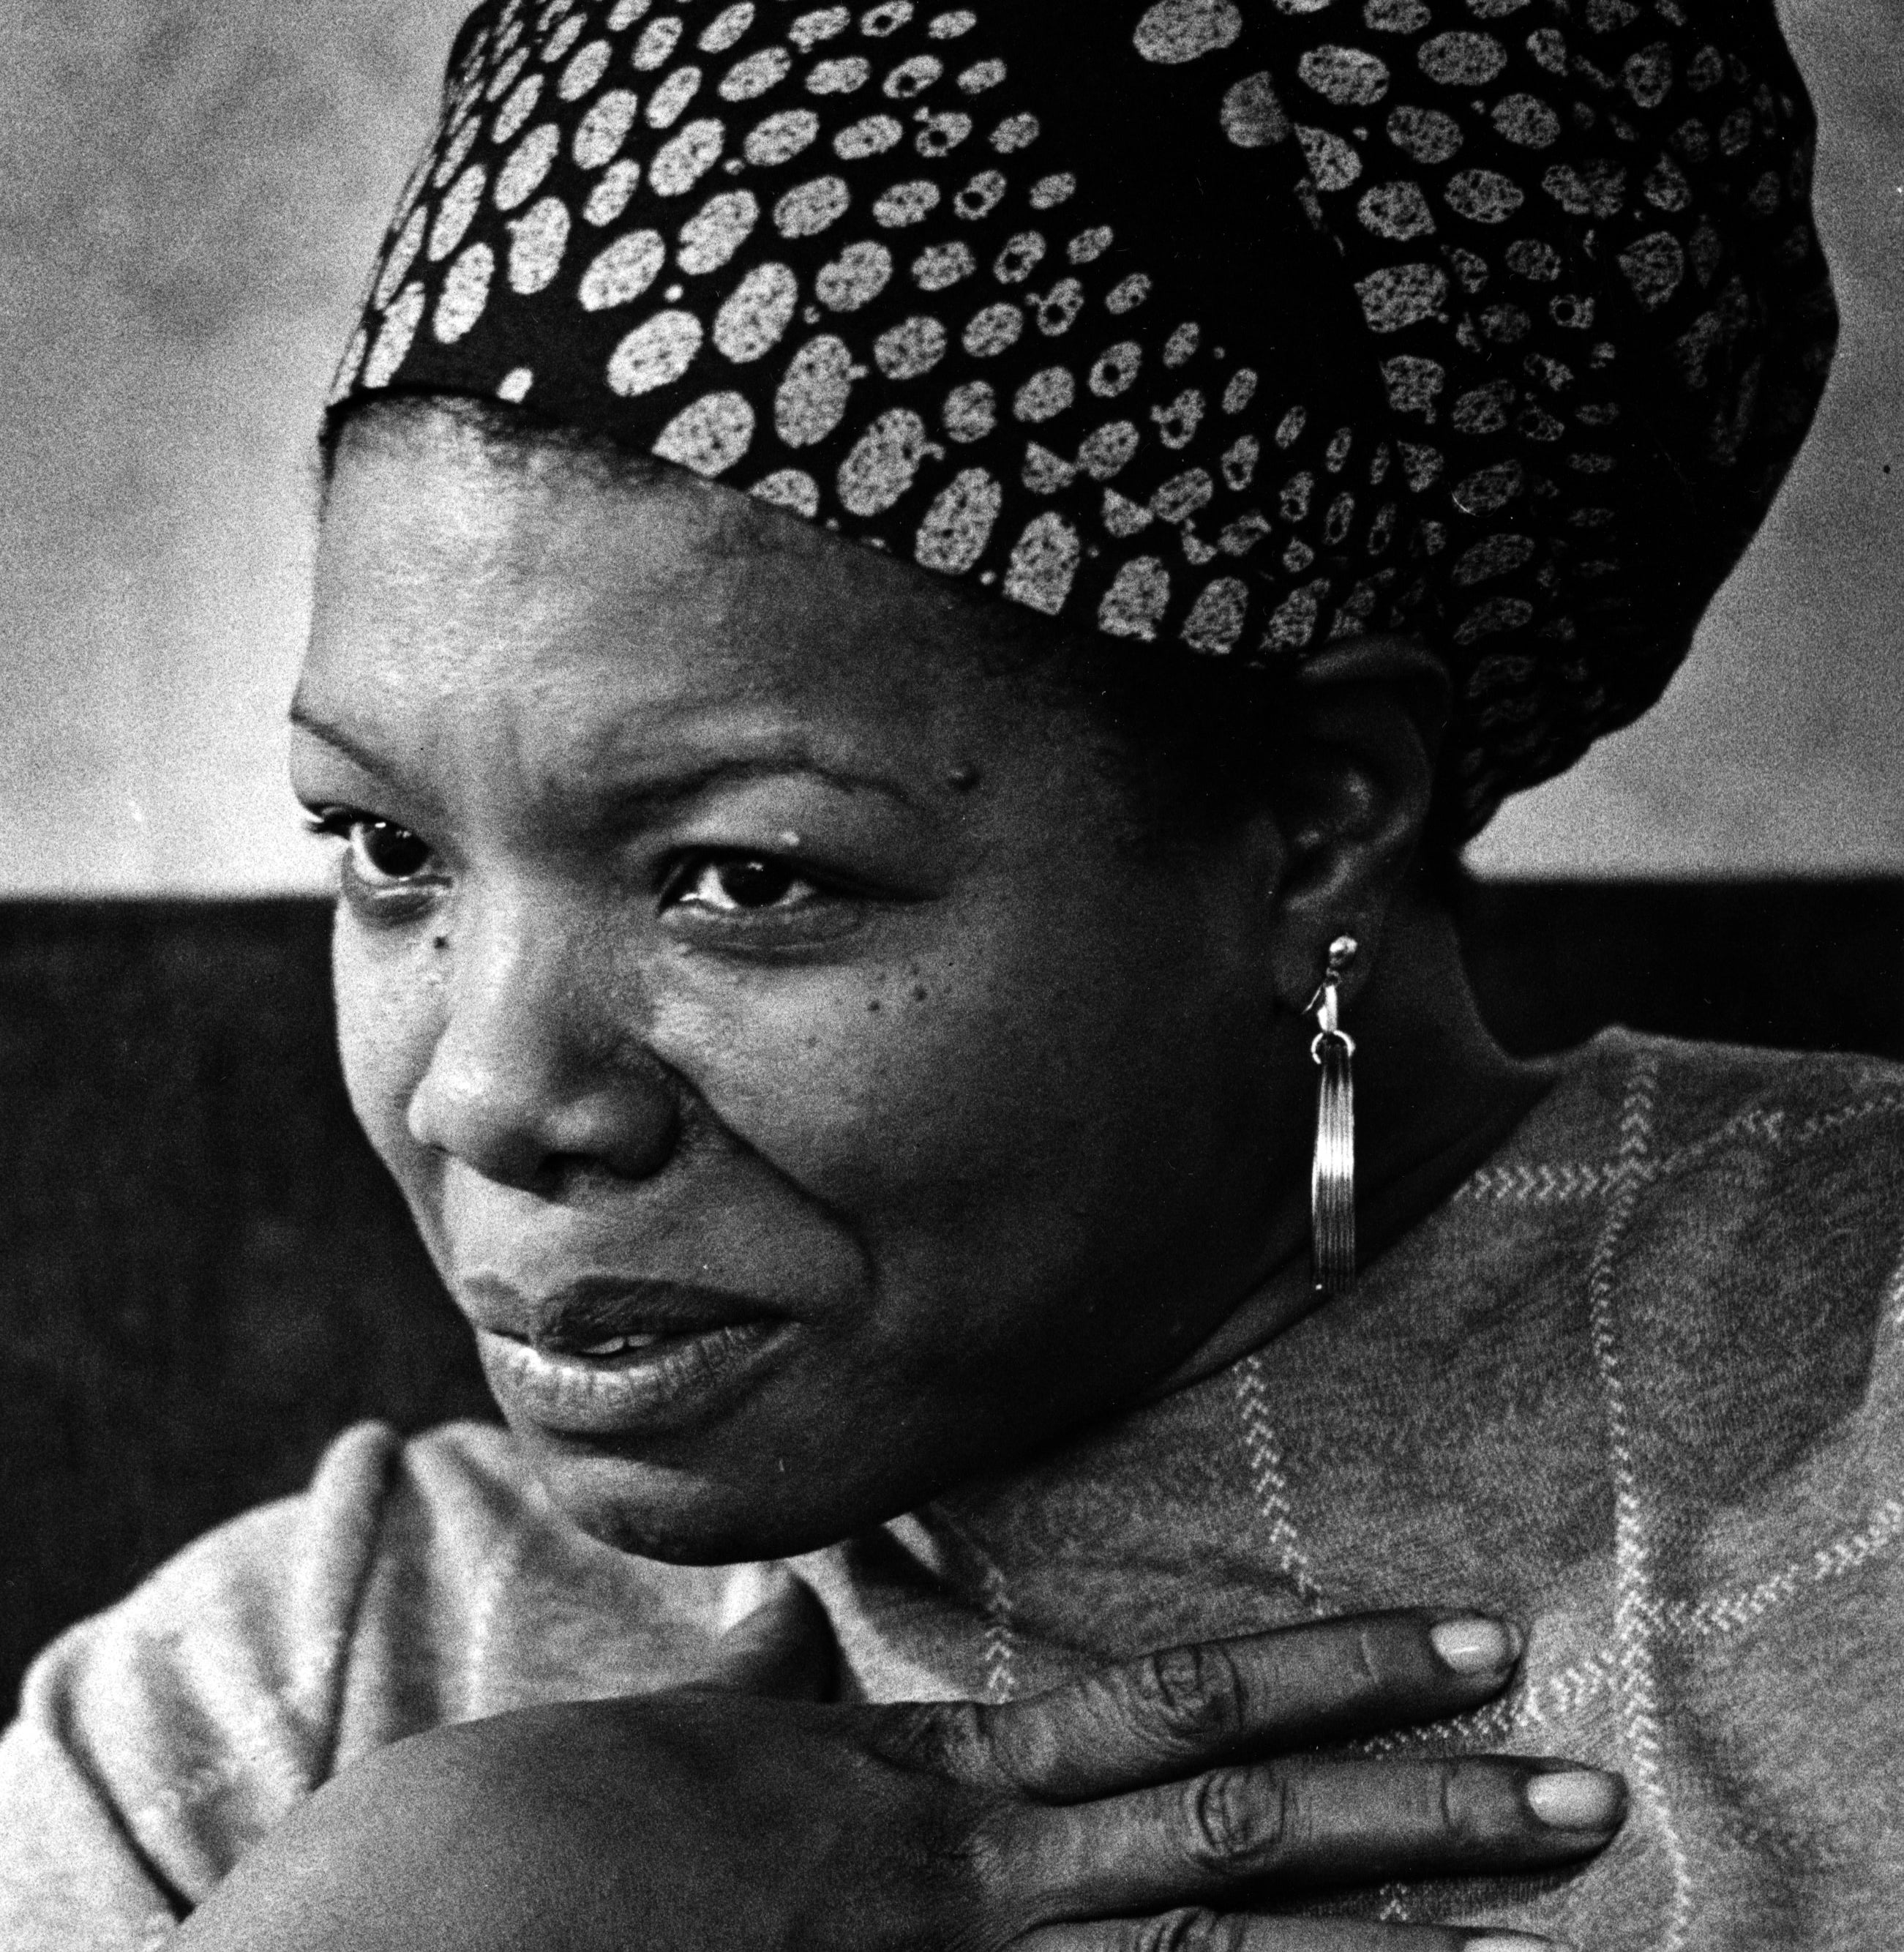 Maya Angelou poses for a portrait during an interview